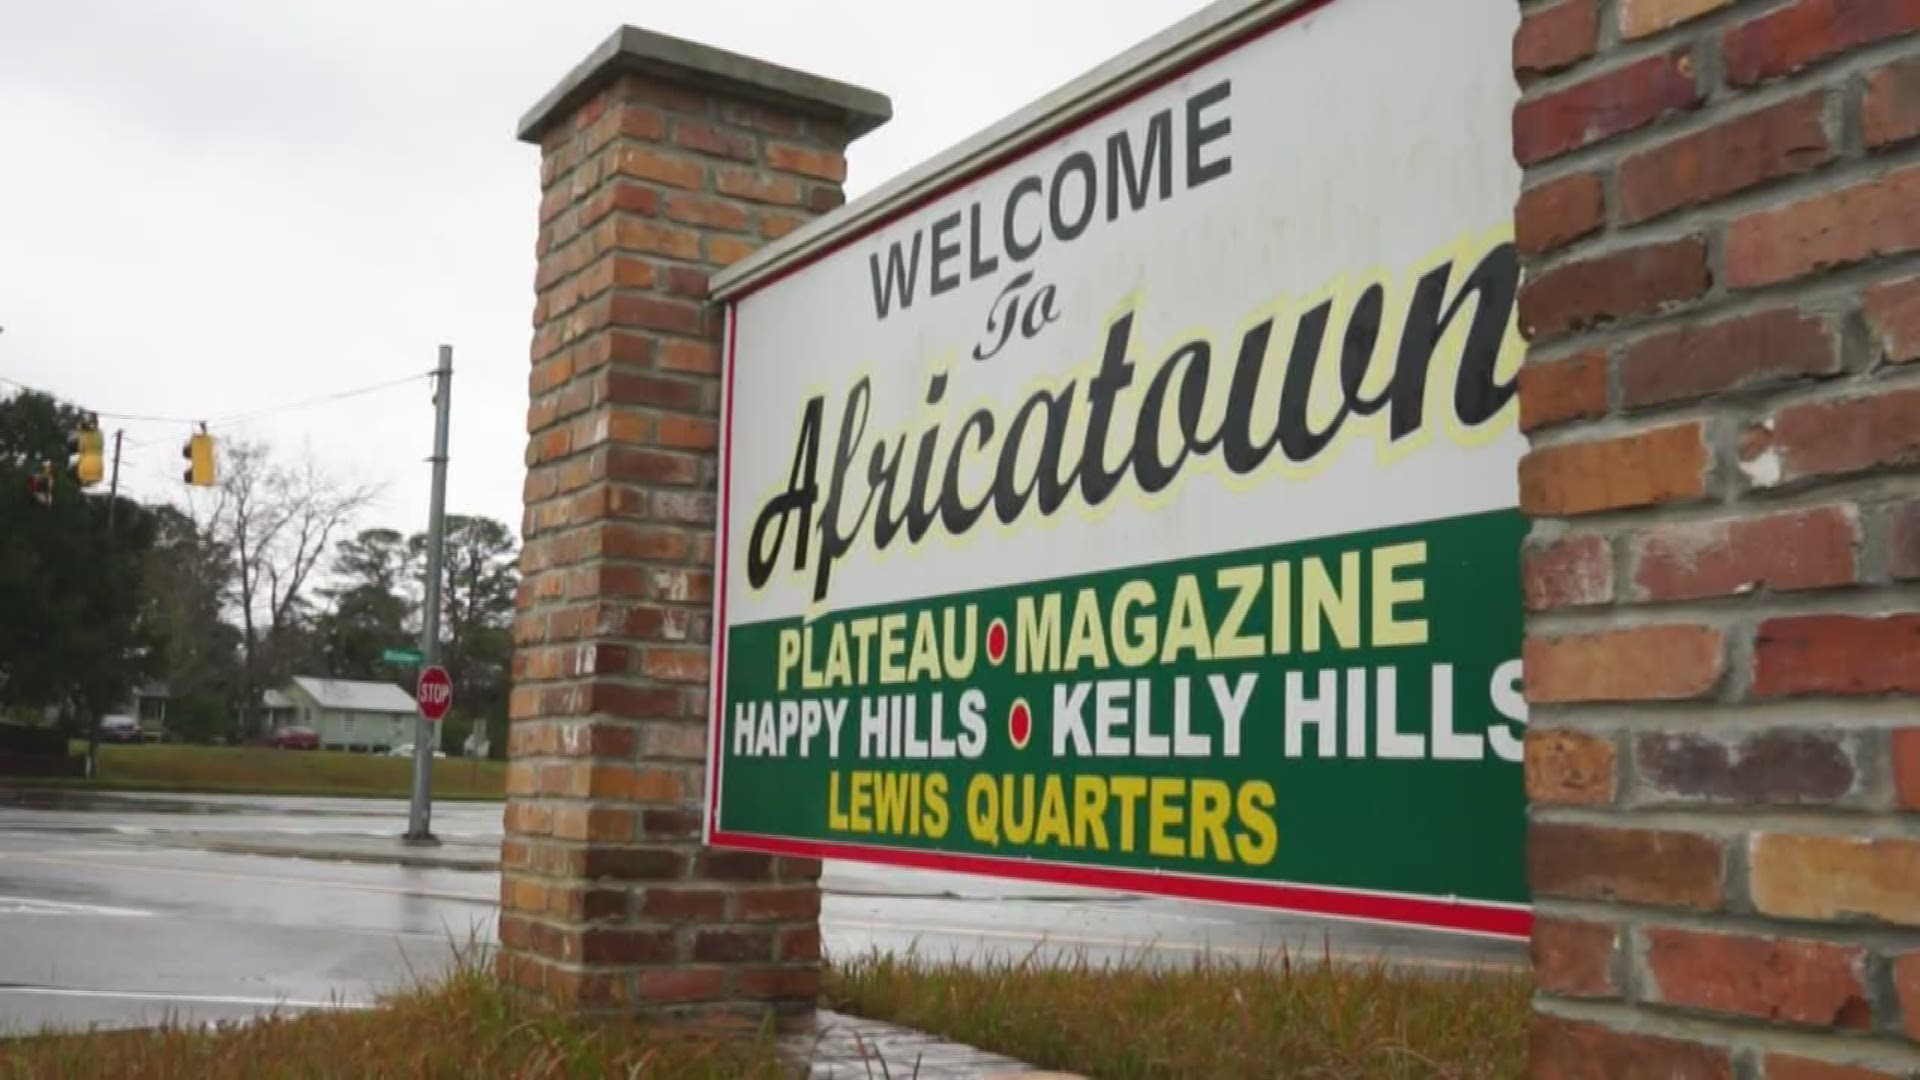 Darron Patterson's great-great-grandfather was one of the Africans who came to America on the Clotilda back in the 1800s and founded Africatown.